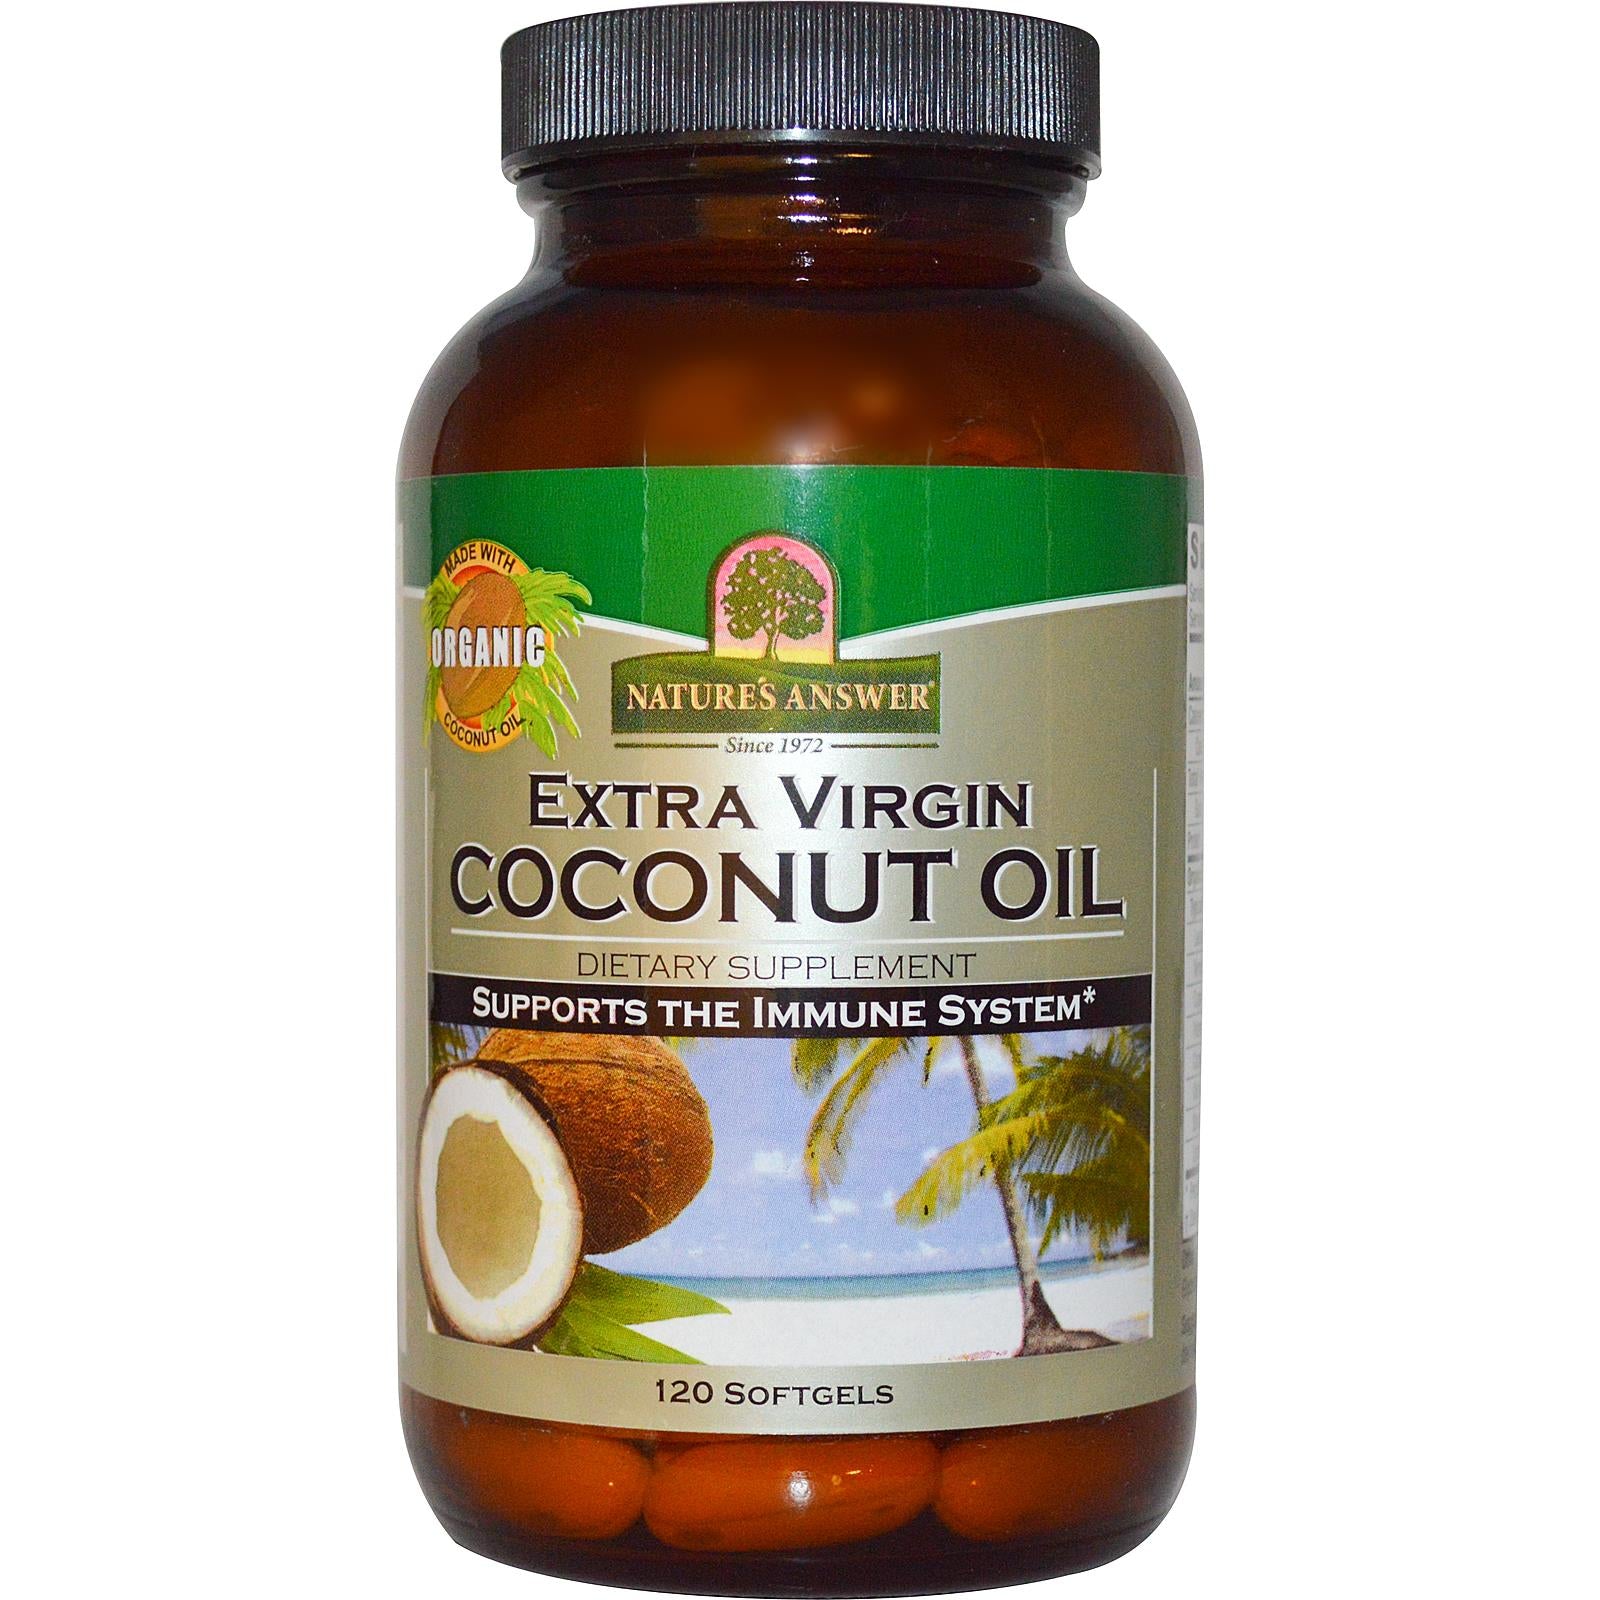 Virgin coconut oil and cholesterol